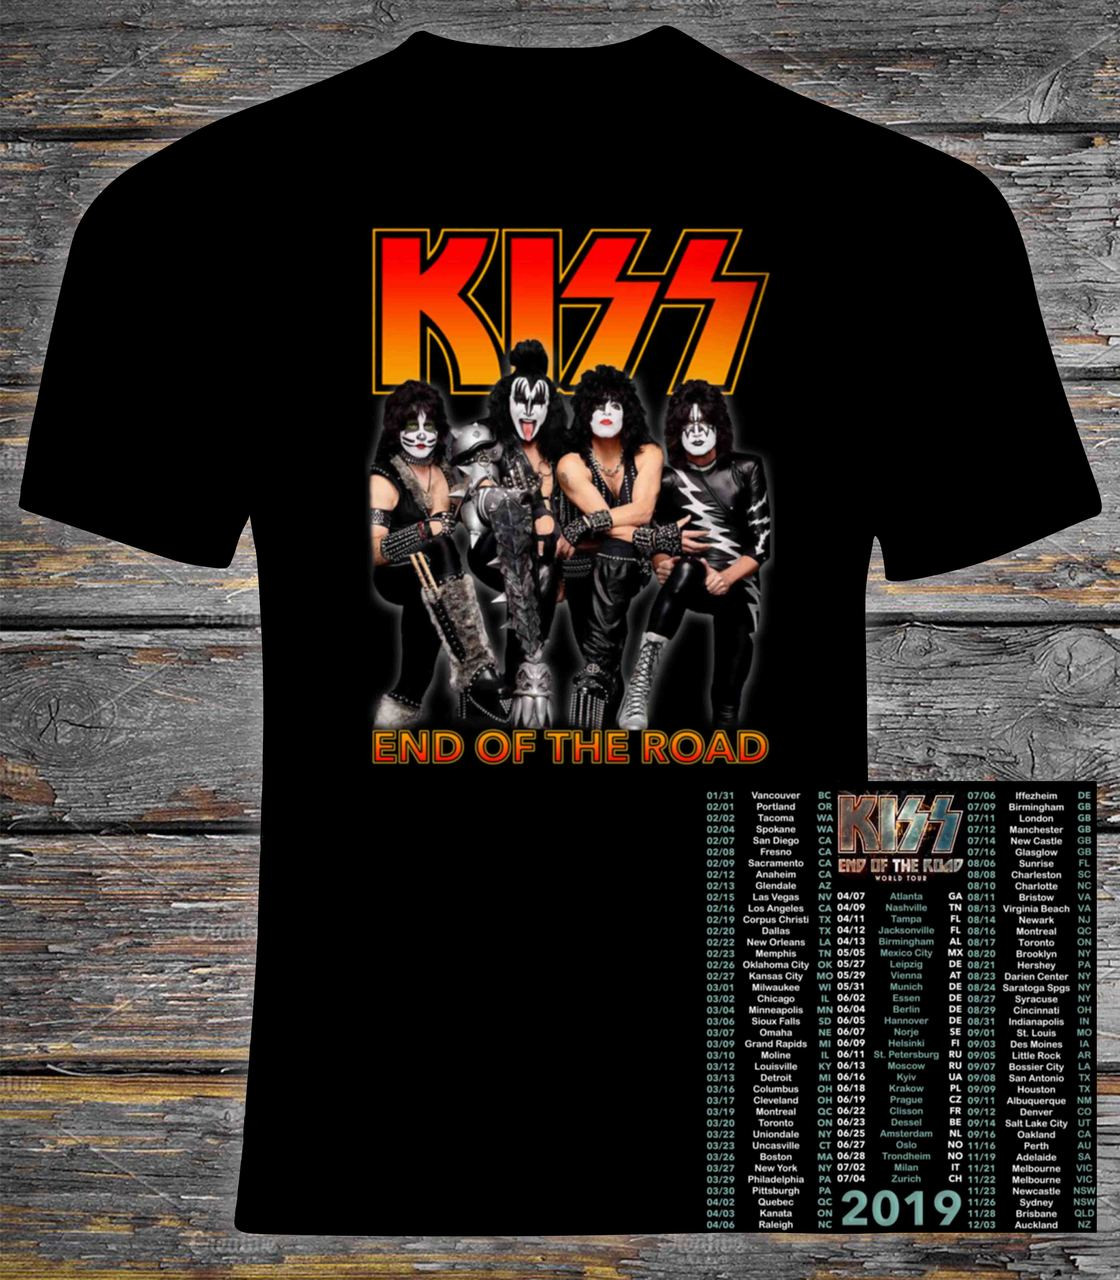 End of the road concert tour t shirt with Europe/T Country USA